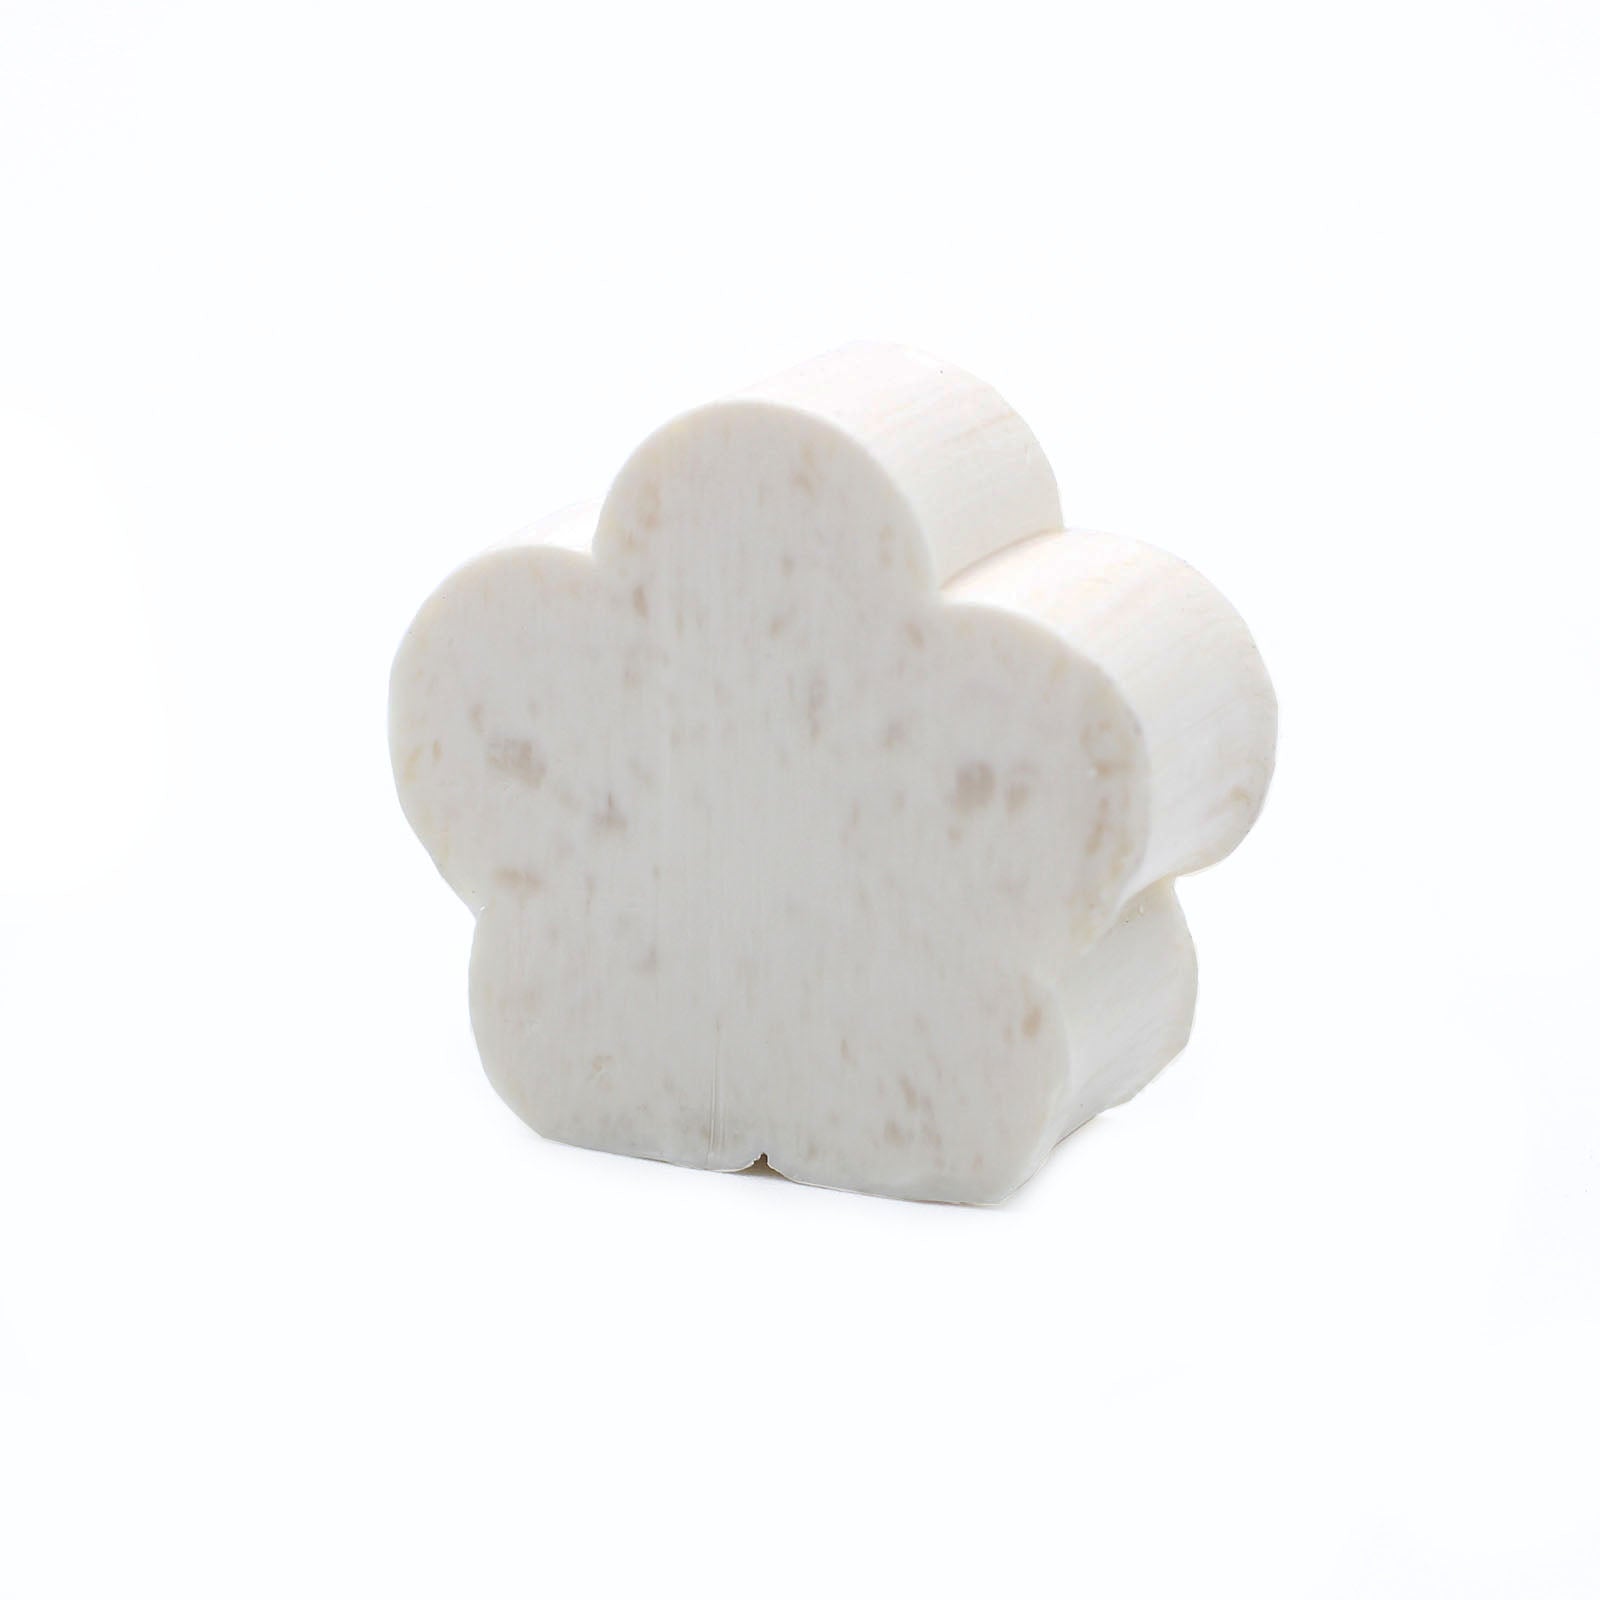 View Flower Guest Soaps Lily of the Valley information